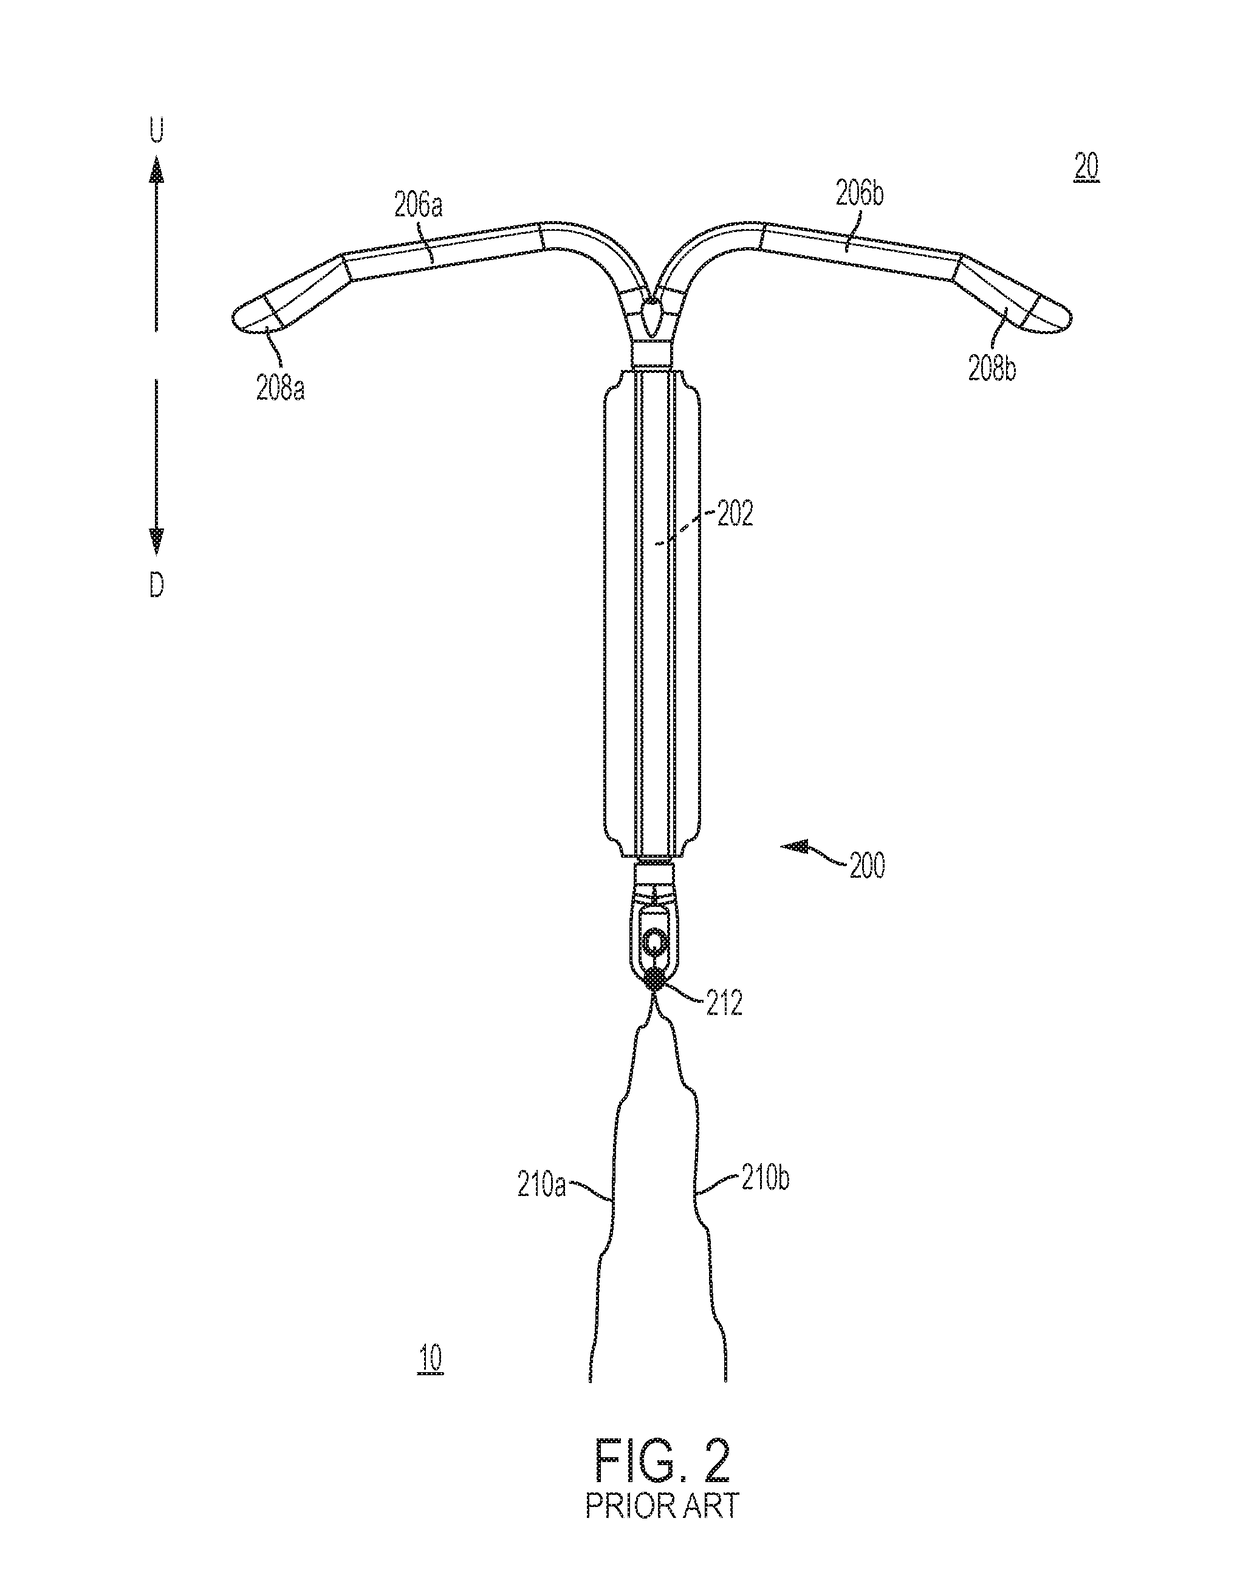 Iud insertion devices, and related methods and kits therefor